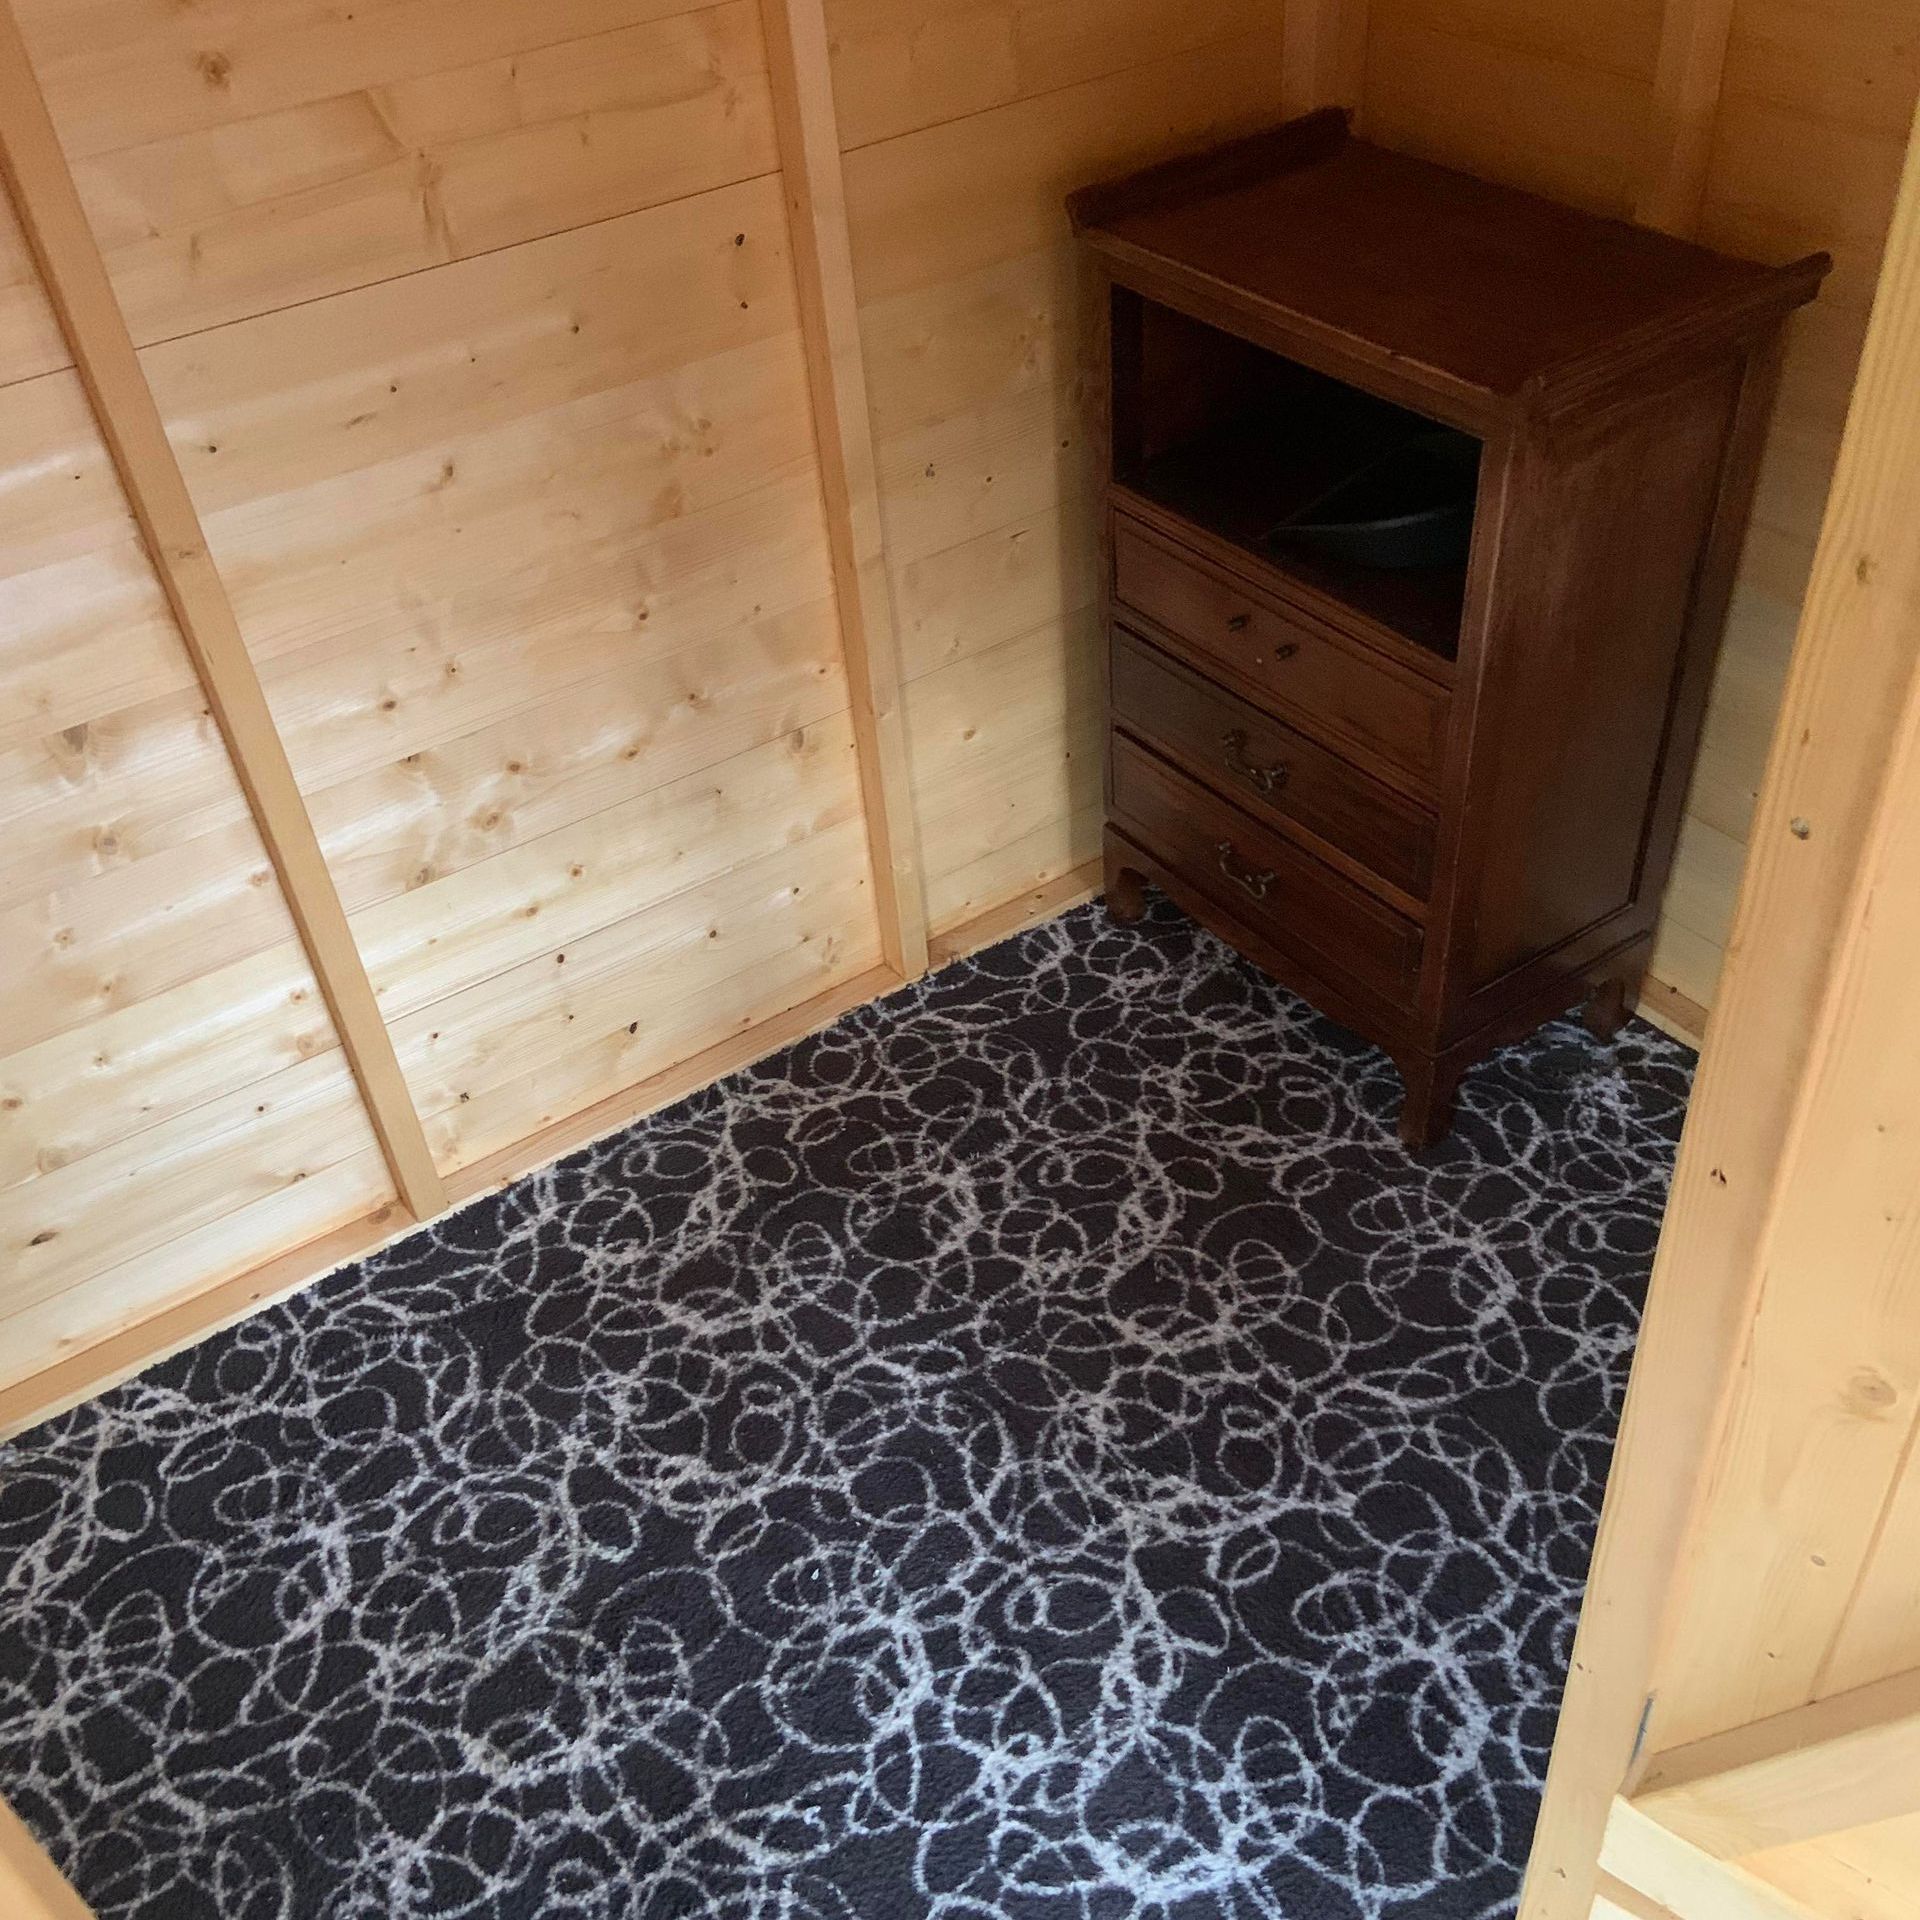 inside of the 7' x 6' rabbit house that the customer has sent in.